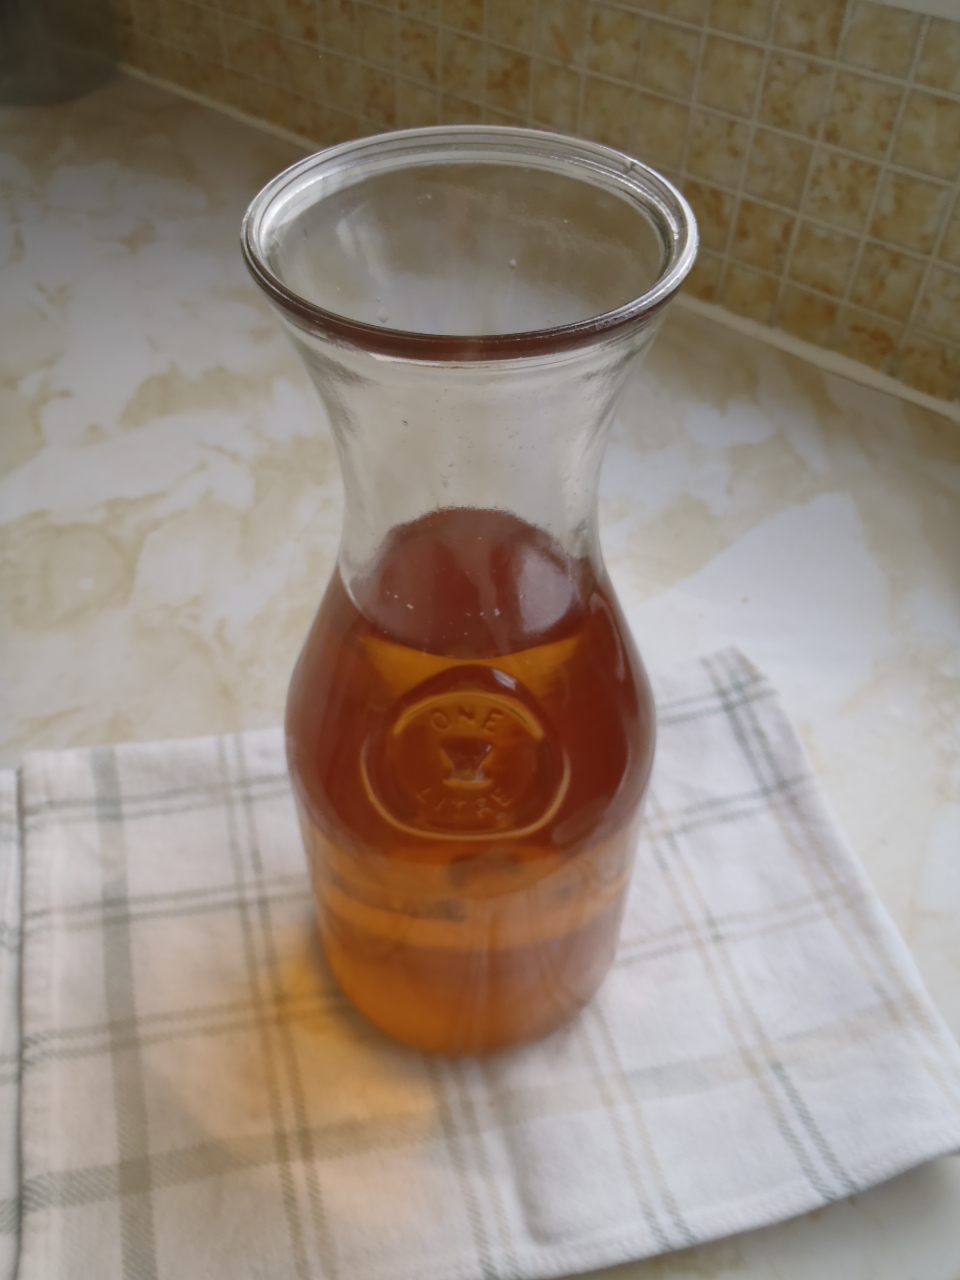 Homemade maple syrup